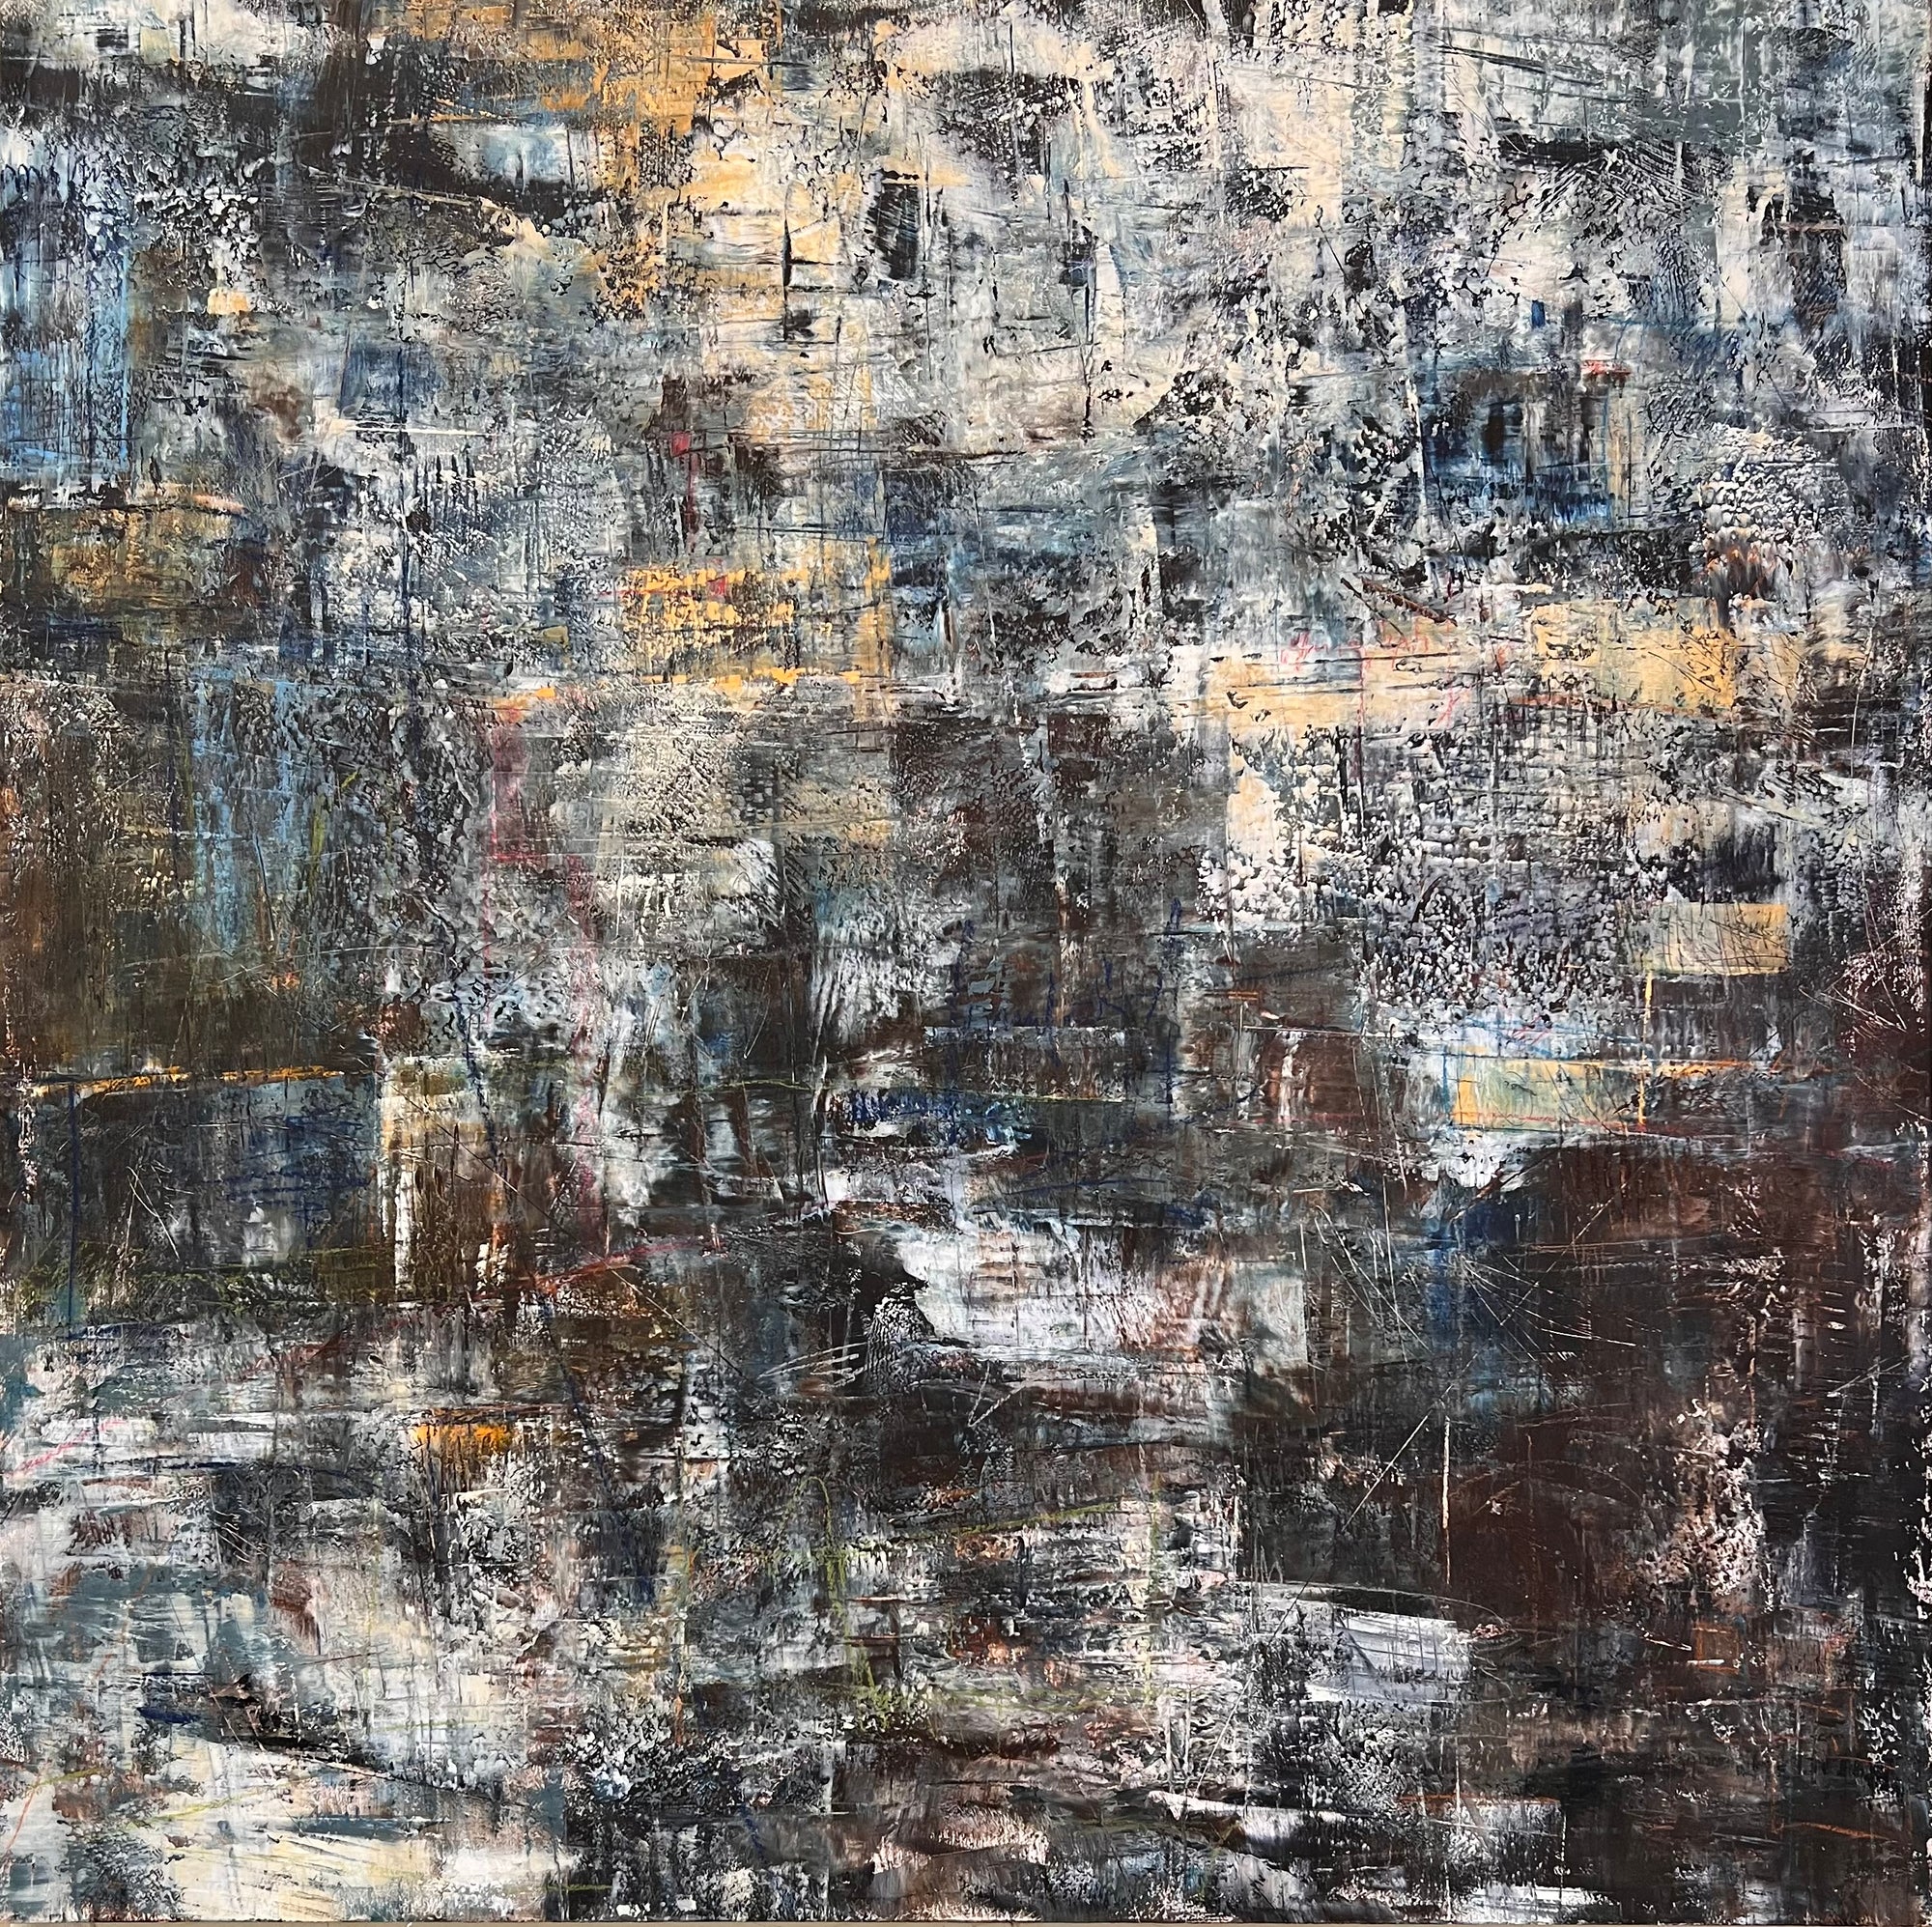 On water and land 48"x48"